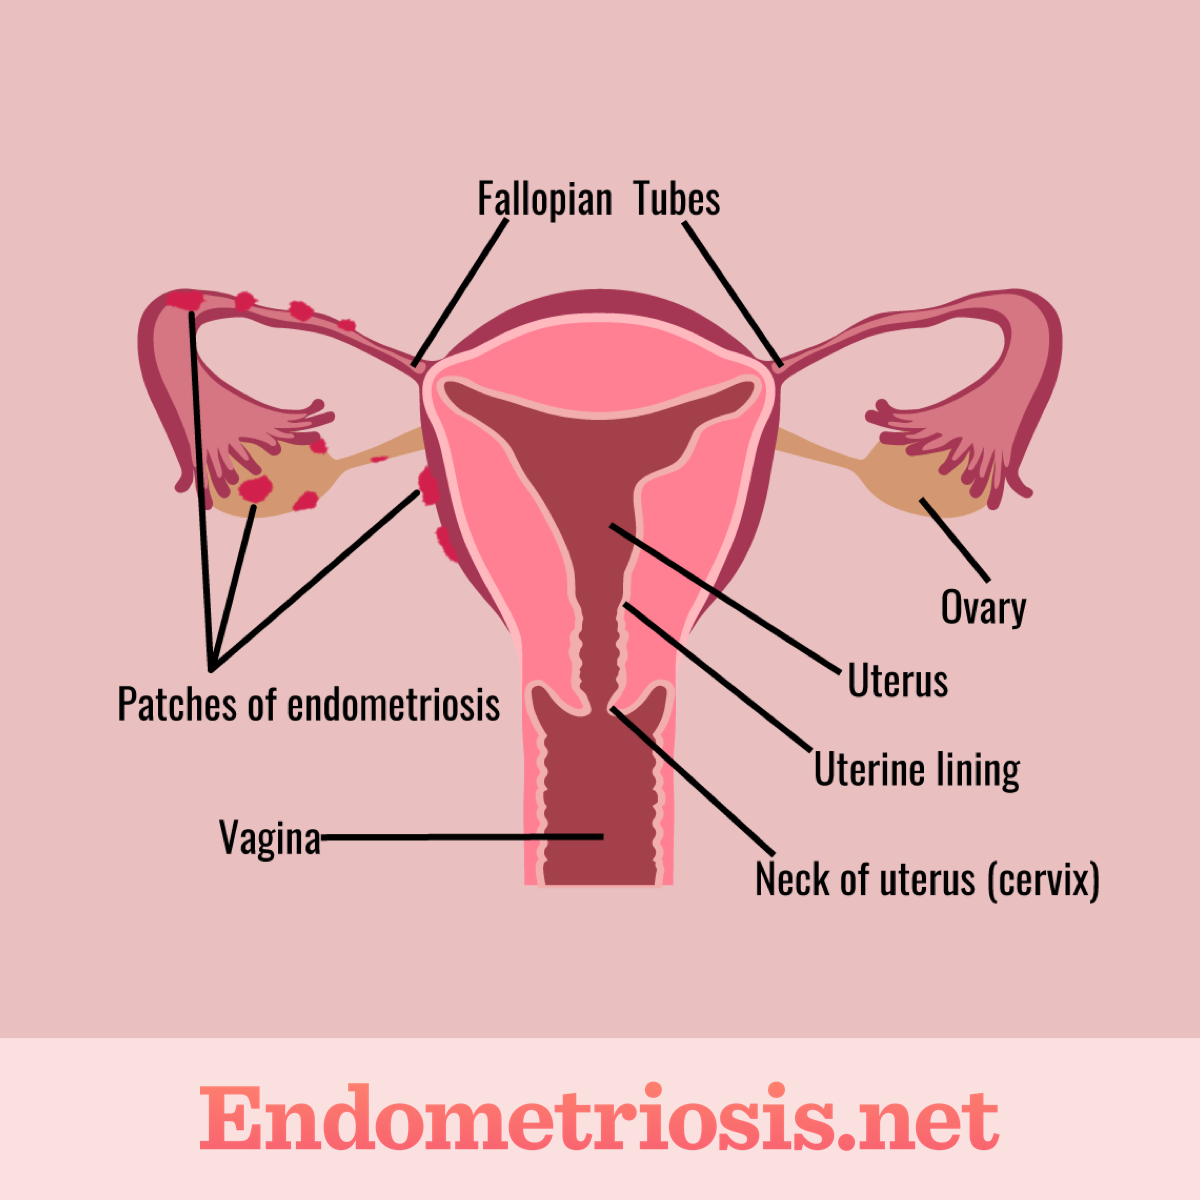 Female reproductive organs with patches of endometriosis lesions shown appearing on the ovaries and the fallopian tubes